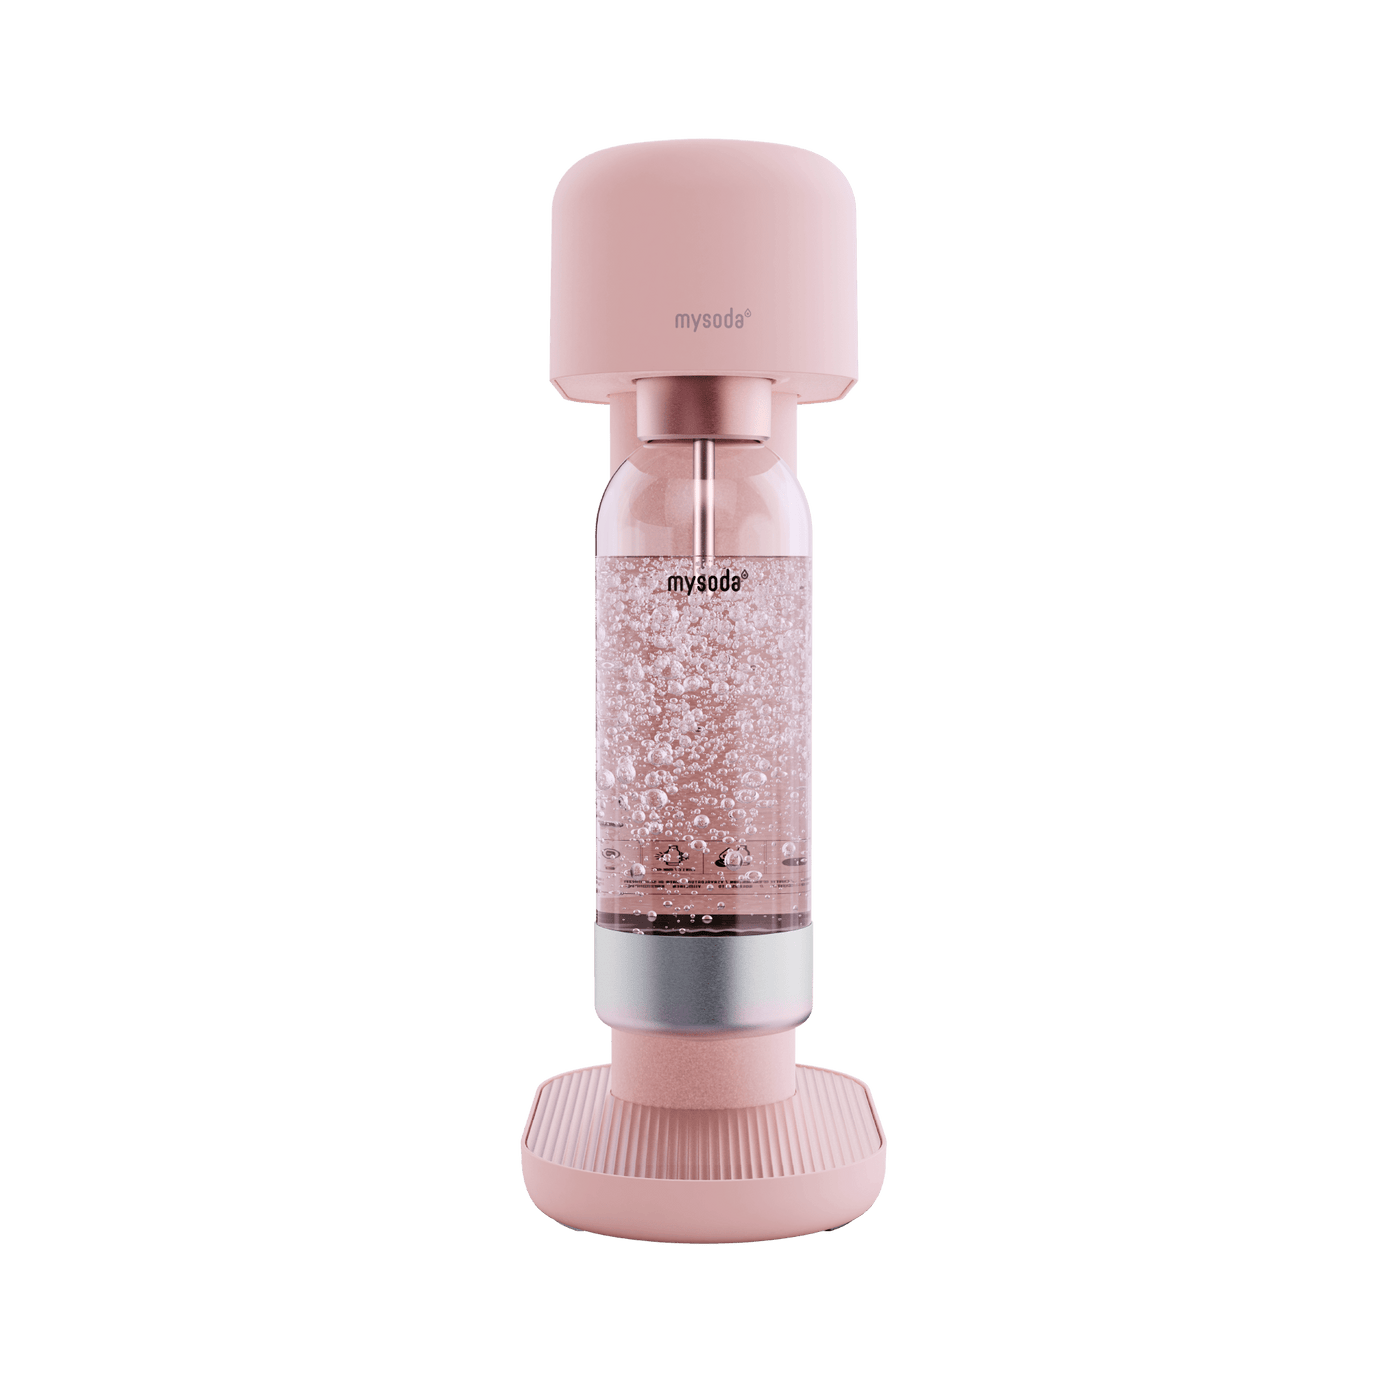 Ruby 2 sparkling water maker